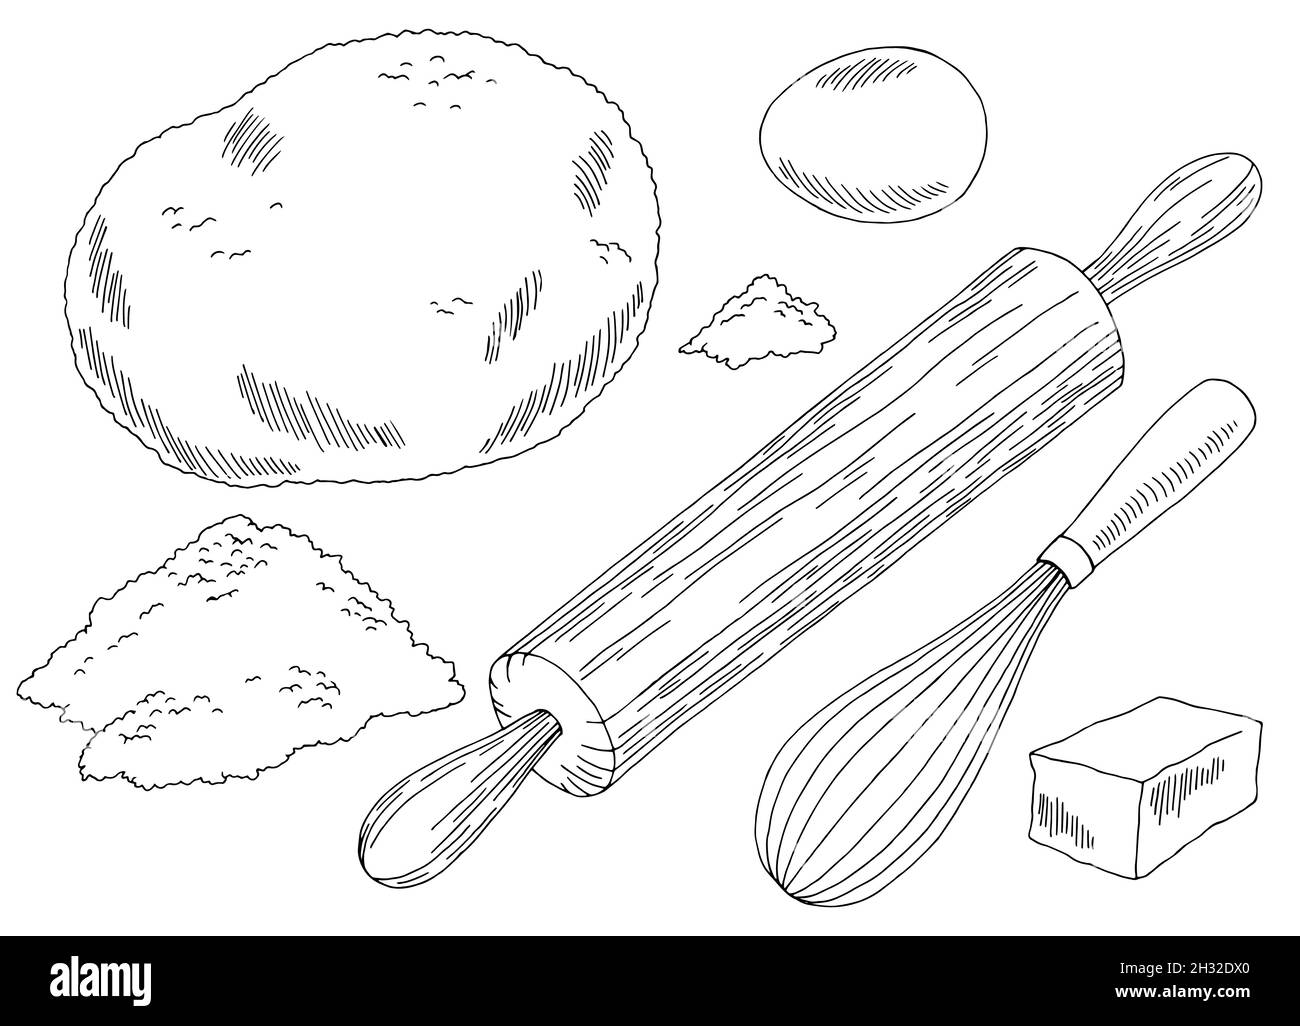 Dough flour rolling pin graphic black white isolated sketch illustration vector Stock Vector